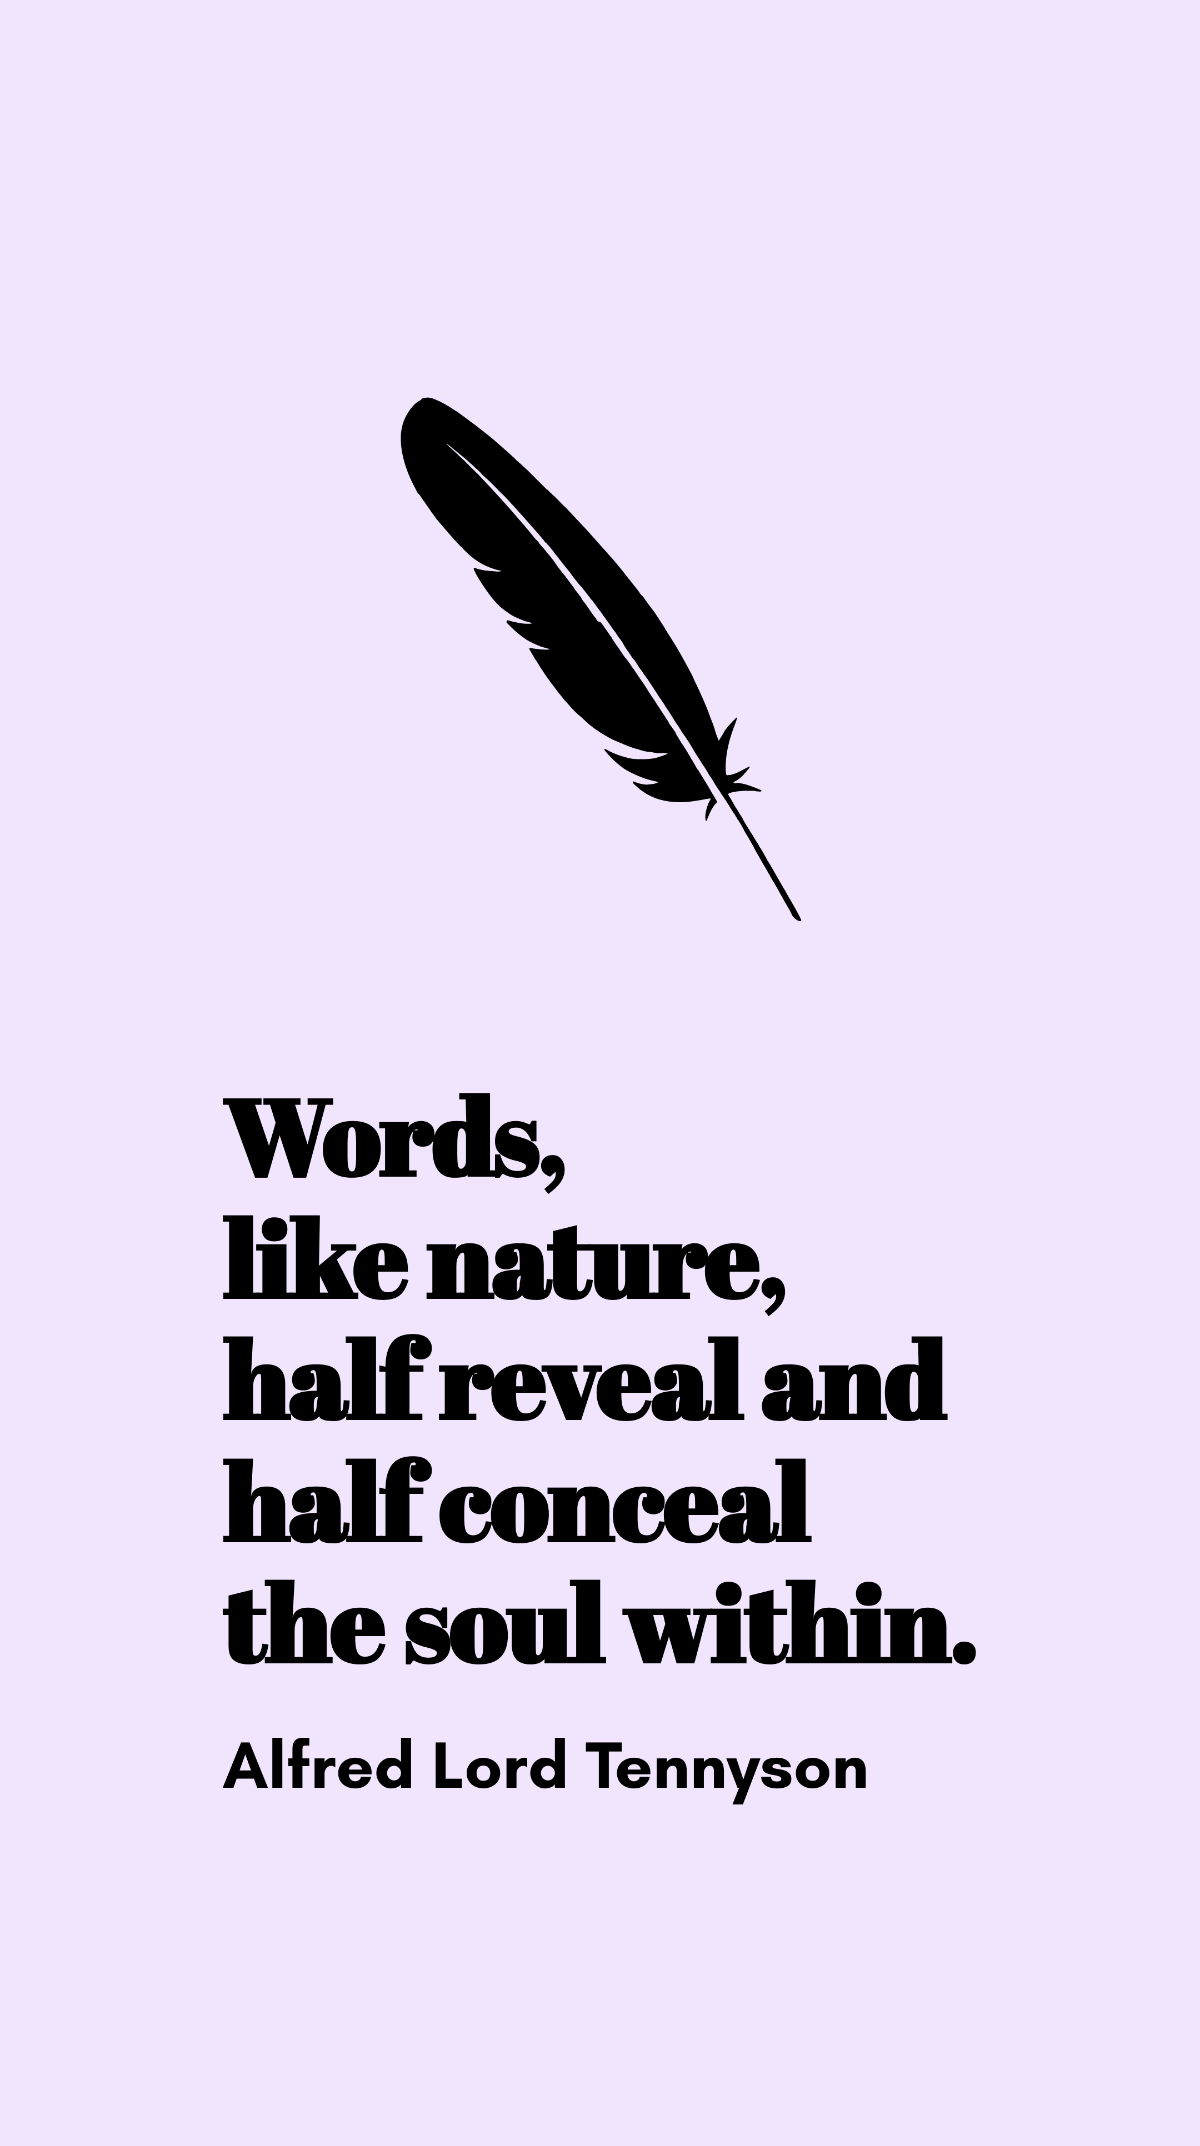 Free Alfred Lord Tennyson - Words, like nature, half reveal and half conceal the soul within. Template